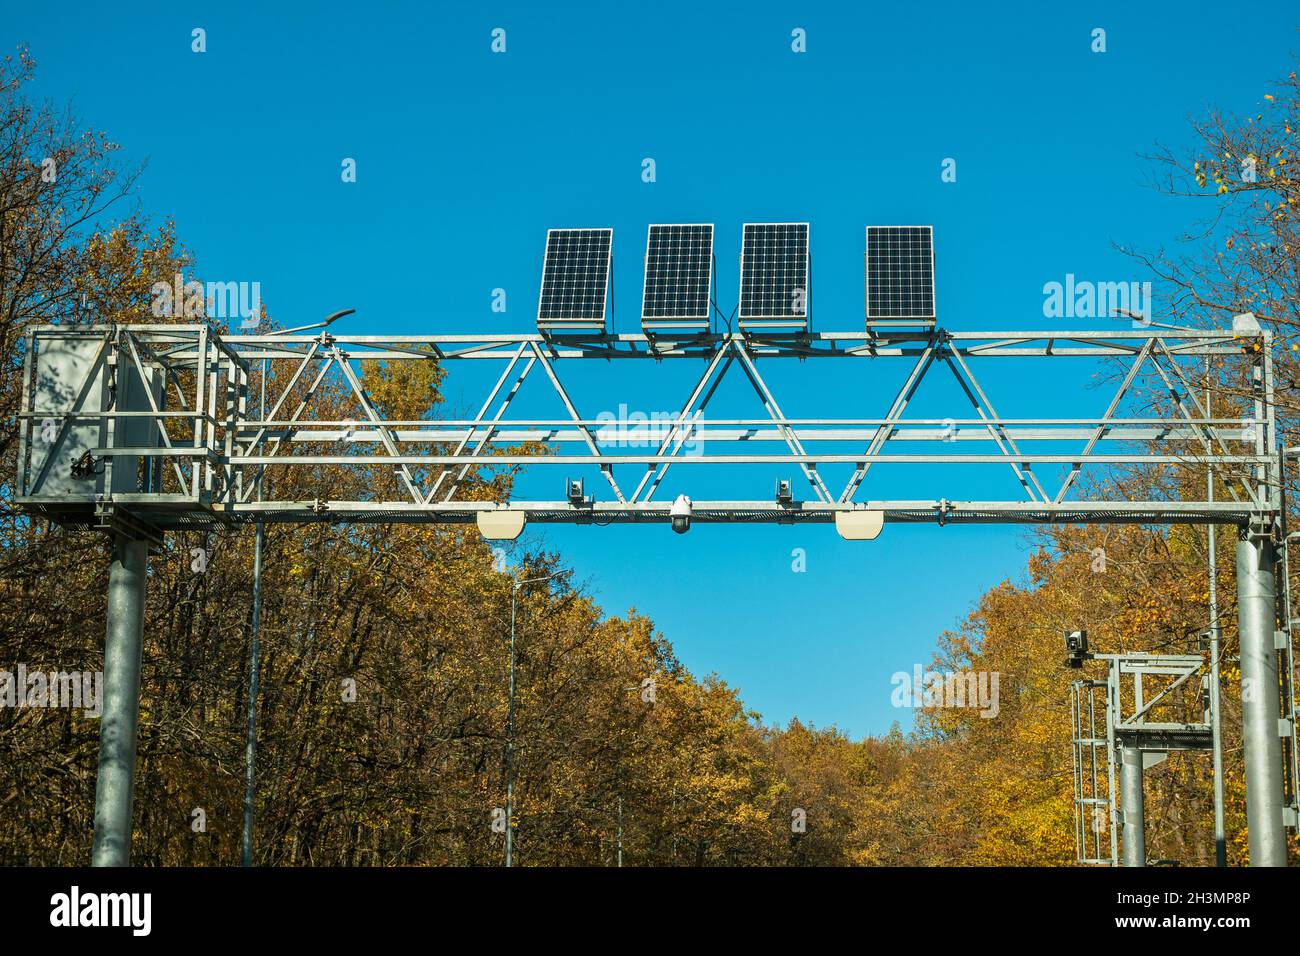 Weight control post with cameras fixing speed and weights. Solar panels are installed on the structure of the post. The concept of safety on the roads Stock Photo